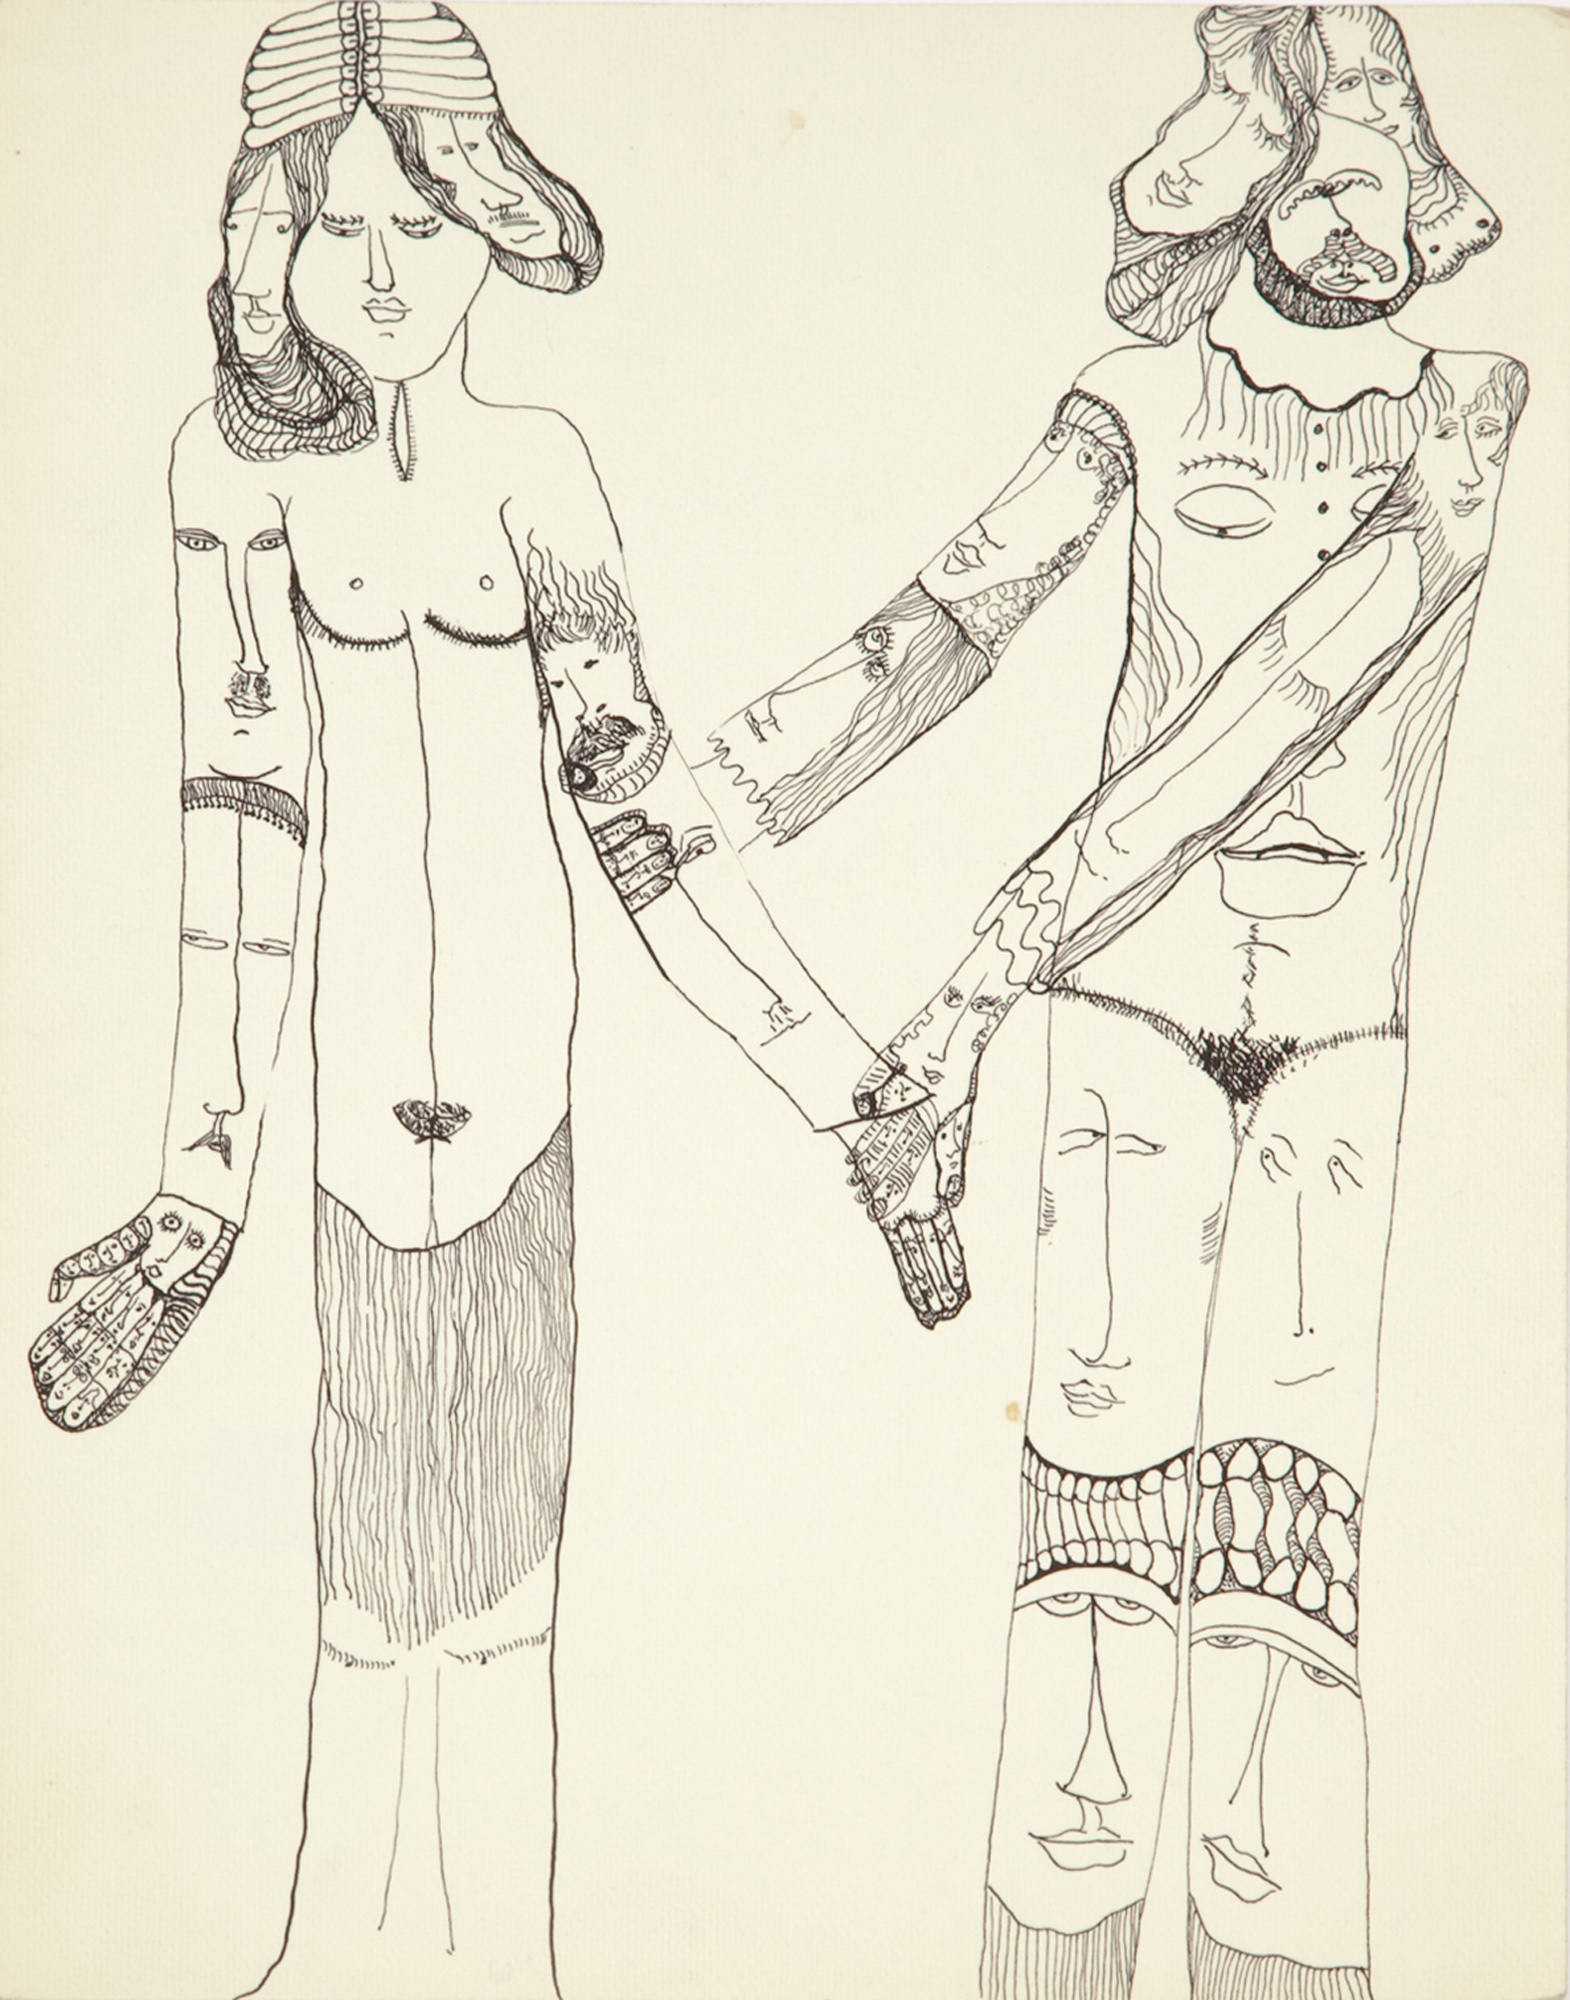 A sketch of two figures, made of various faces, touch.